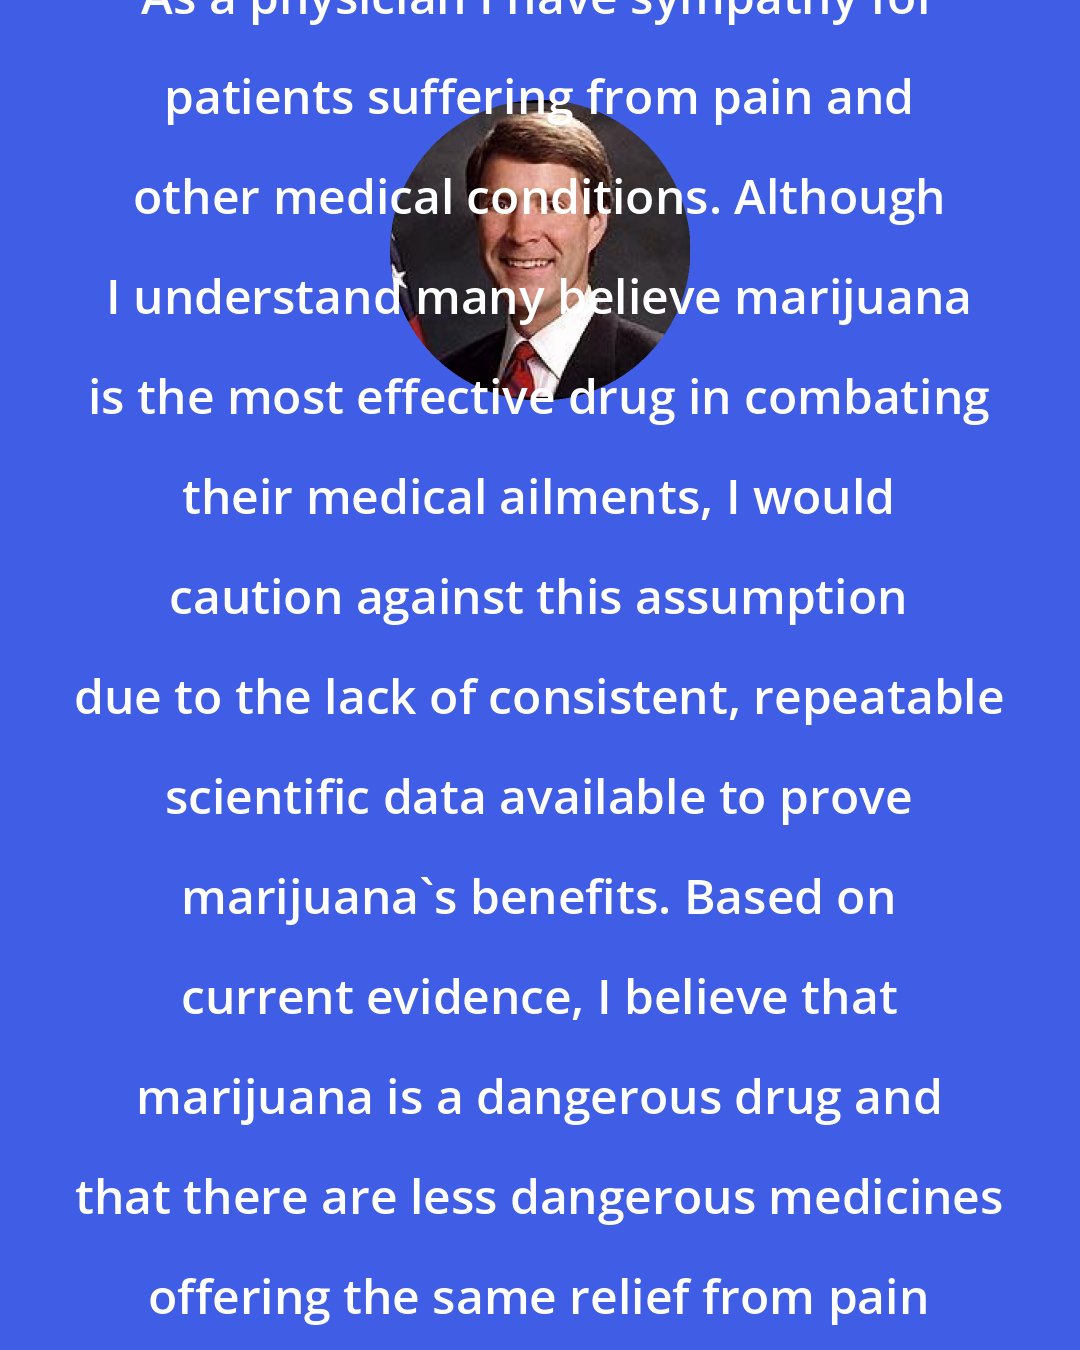 Bill Frist: As a physician I have sympathy for patients suffering from pain and other medical conditions. Although I understand many believe marijuana is the most effective drug in combating their medical ailments, I would caution against this assumption due to the lack of consistent, repeatable scientific data available to prove marijuana's benefits. Based on current evidence, I believe that marijuana is a dangerous drug and that there are less dangerous medicines offering the same relief from pain and other medical symptoms.